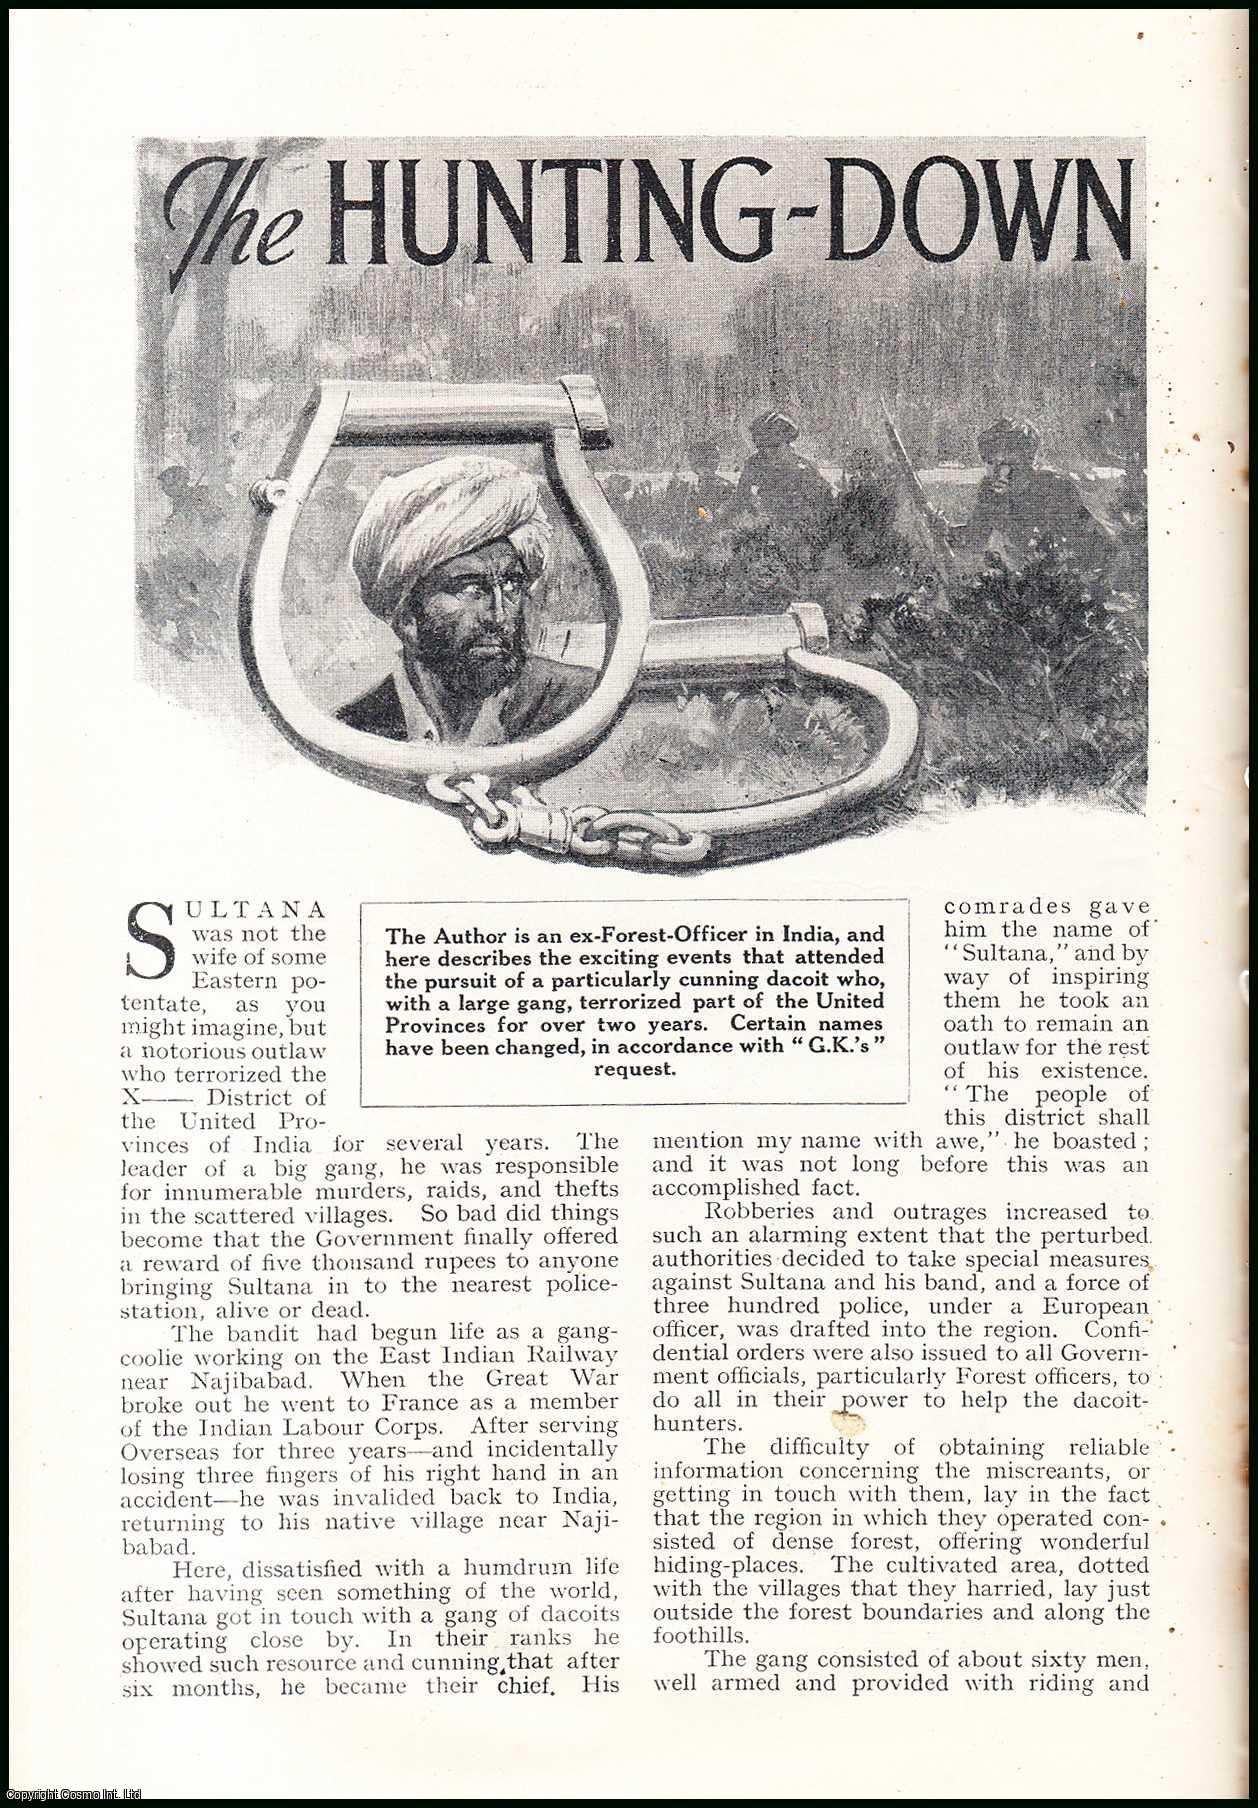 G.K. Illustrated by E. Prater. - The Hunting-Down of Sultana : a dacoit who terrorized part of the United Provinces for over two years. An uncommon original article from the Wide World Magazine, 1937.